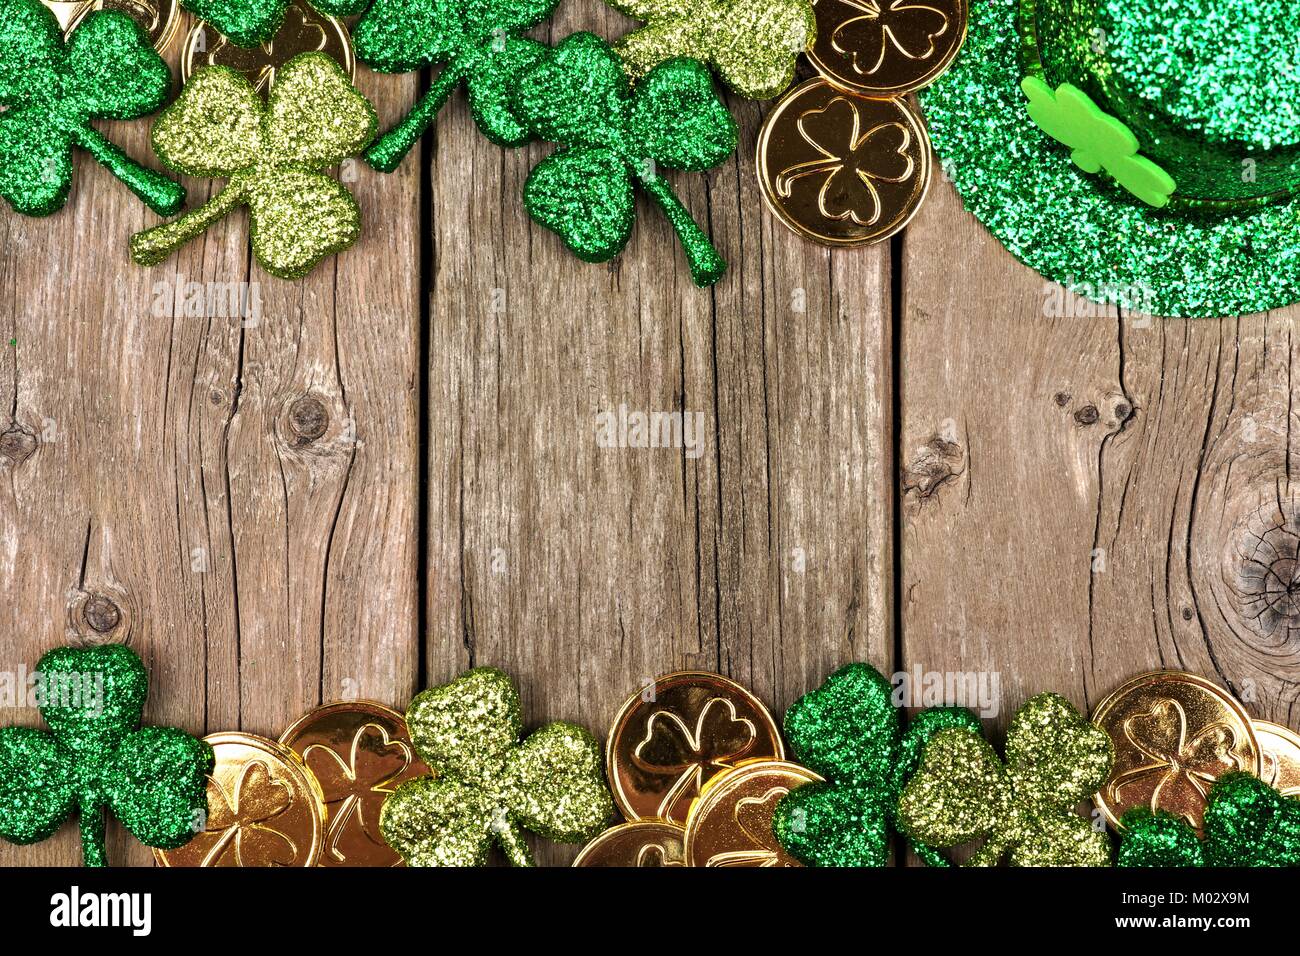 St Patricks Day double border of shamrocks, gold coins and leprechaun hat over rustic wood Stock Photo